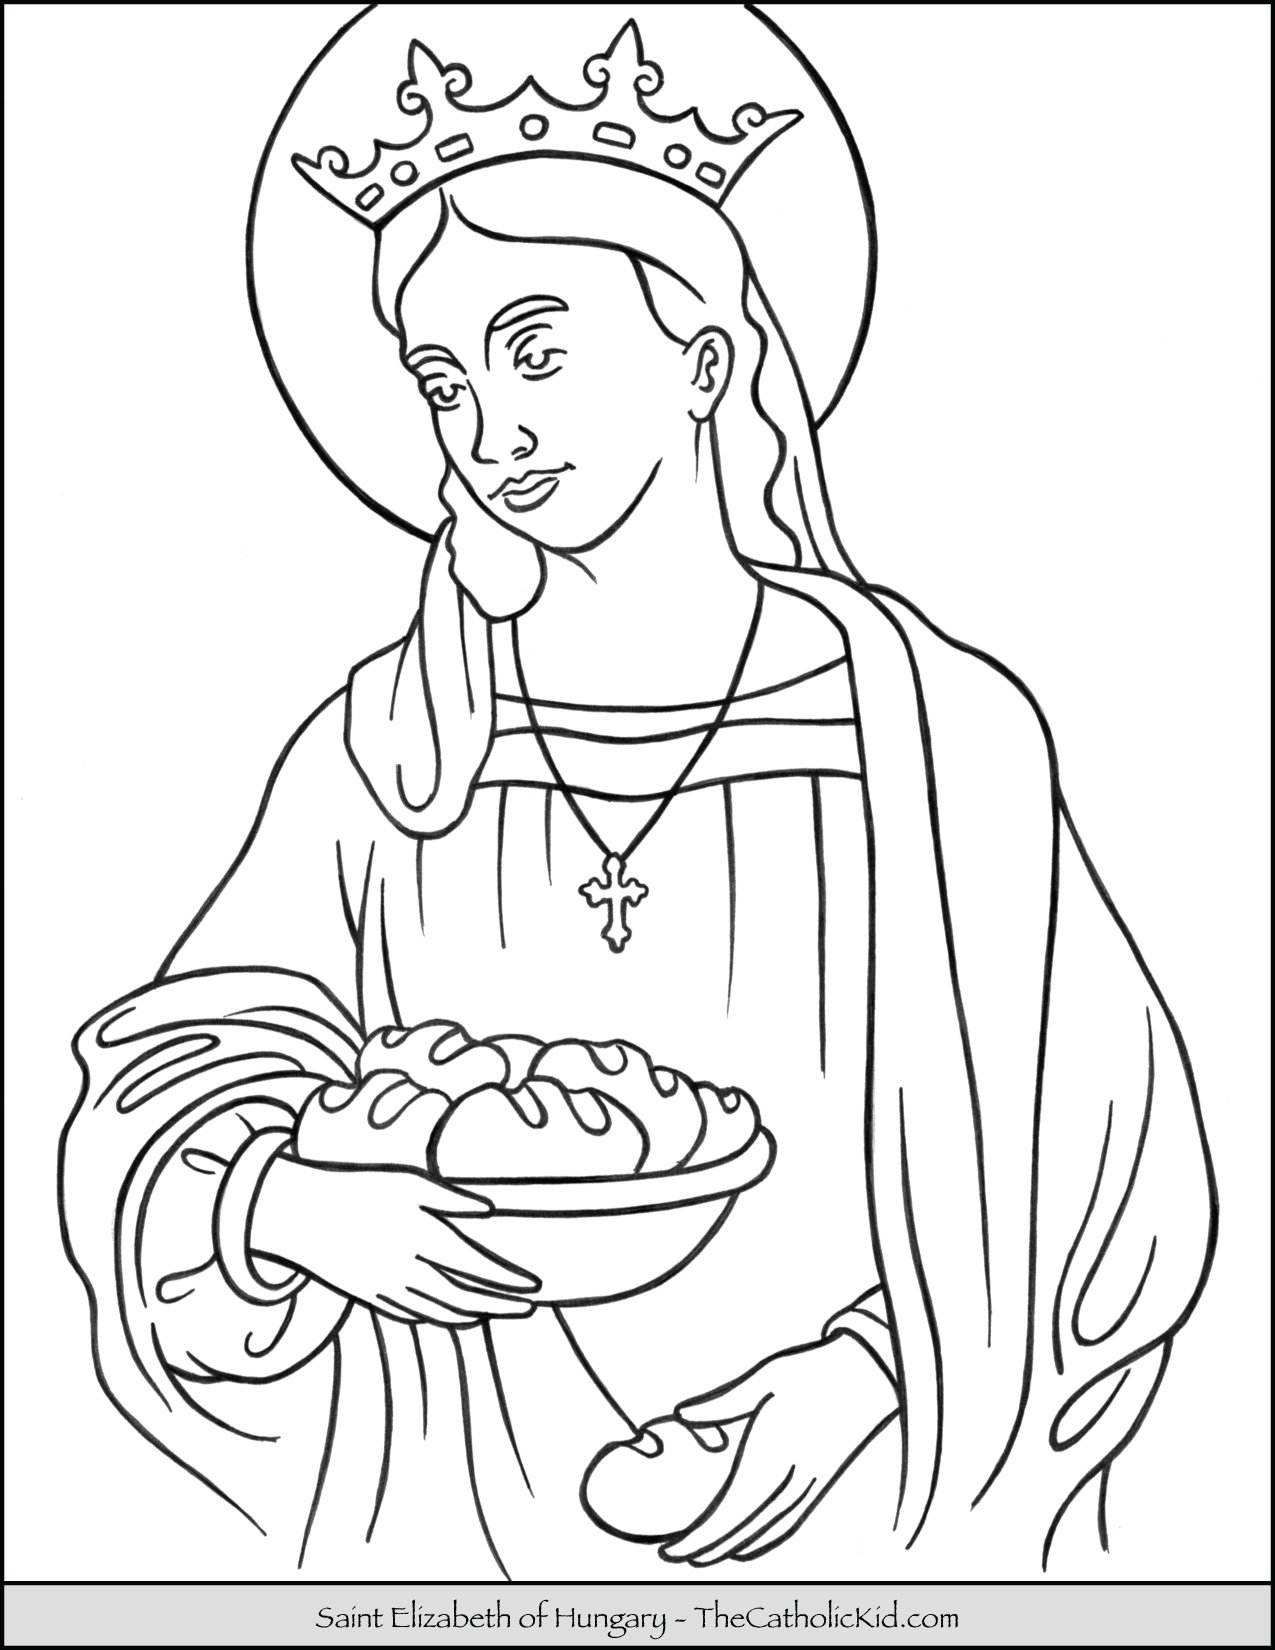 Saint elizabeth of hungary coloring page